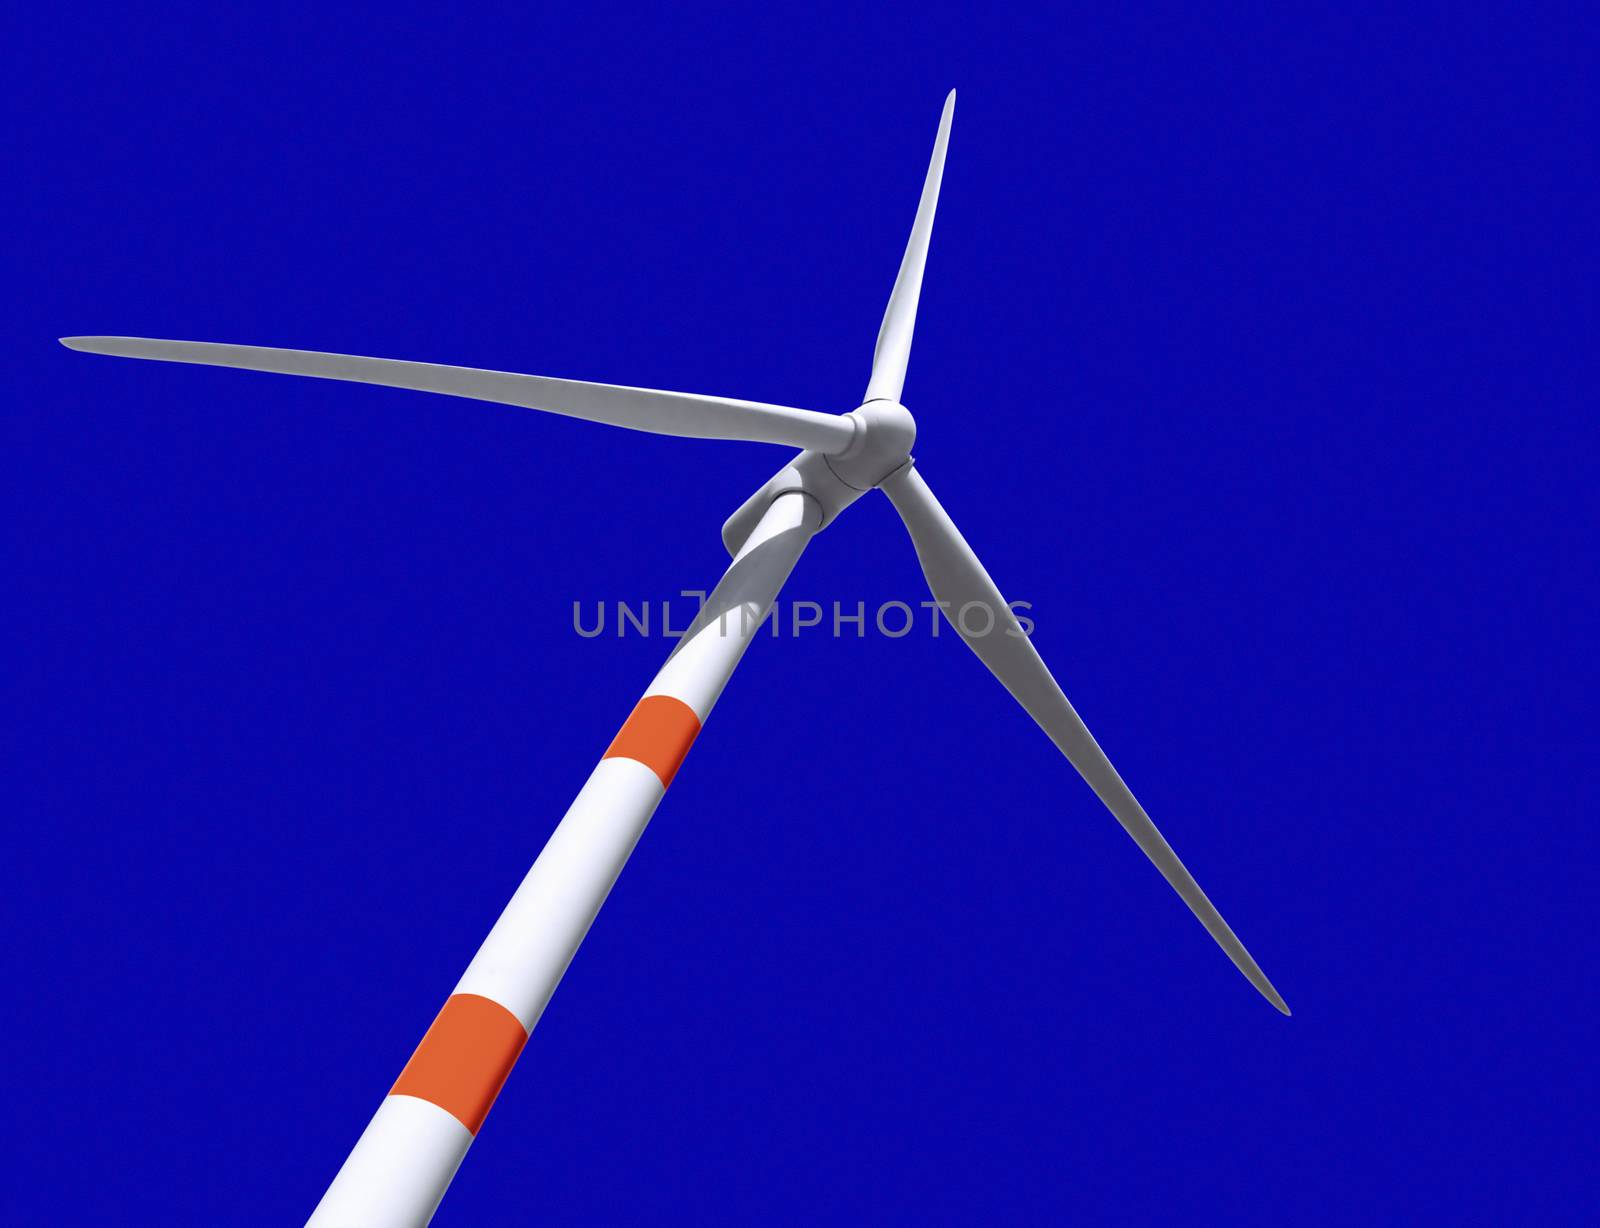 Wind turbine generating electricity over blue sky. Clipping path.